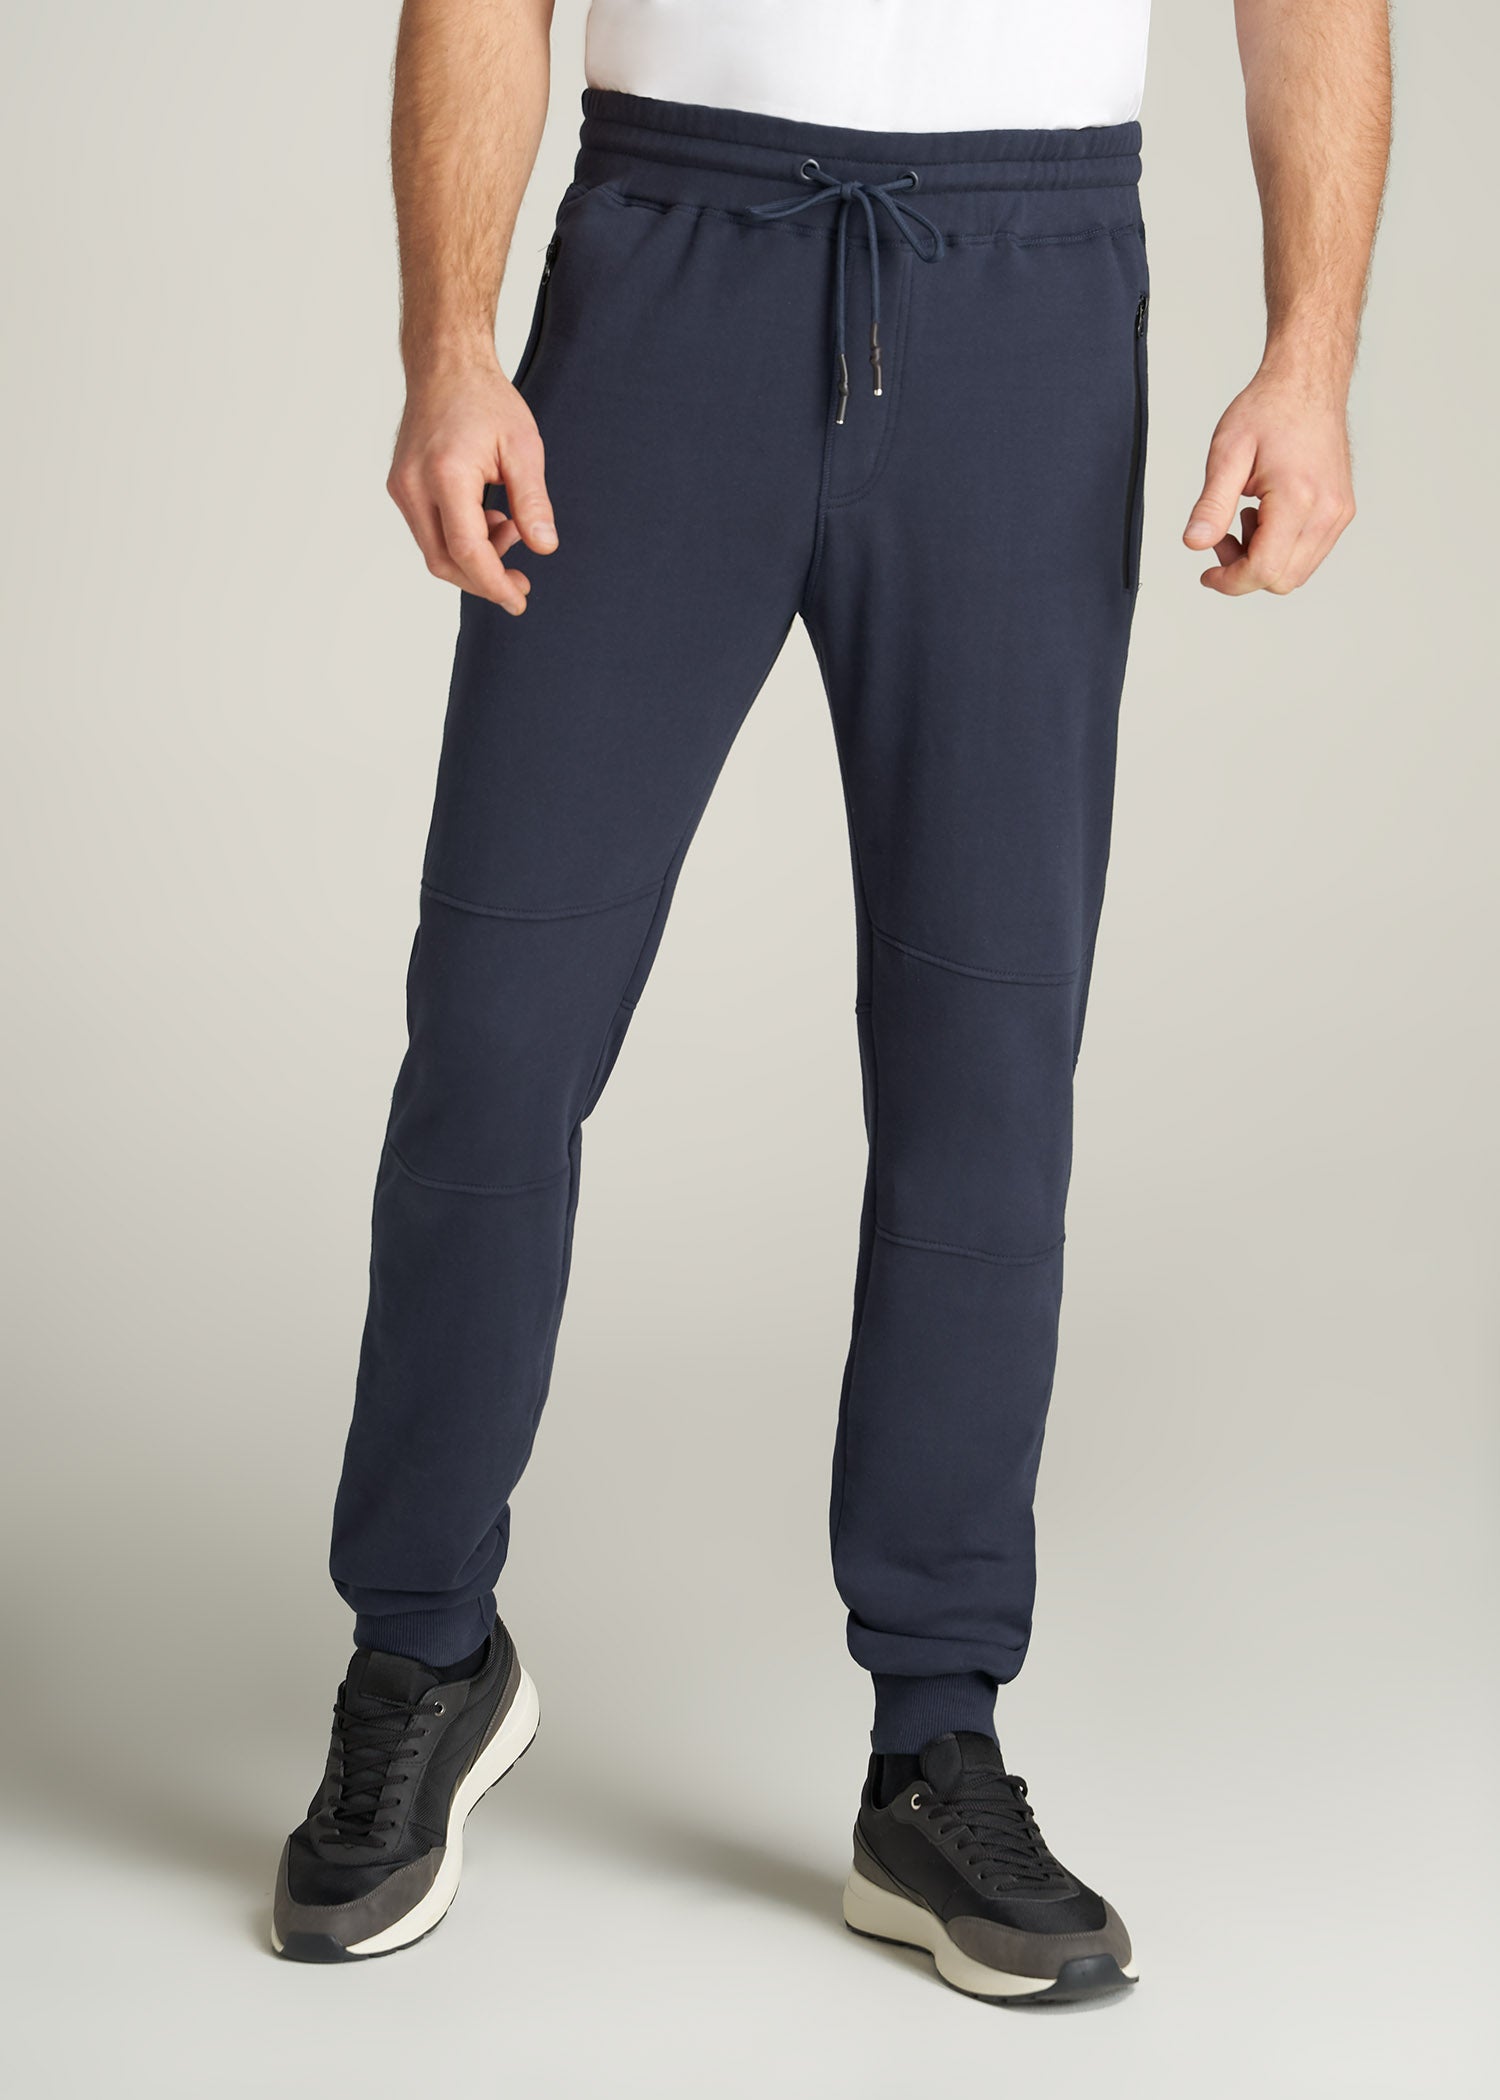 Wearever French Terry Men's Tall Joggers Navy